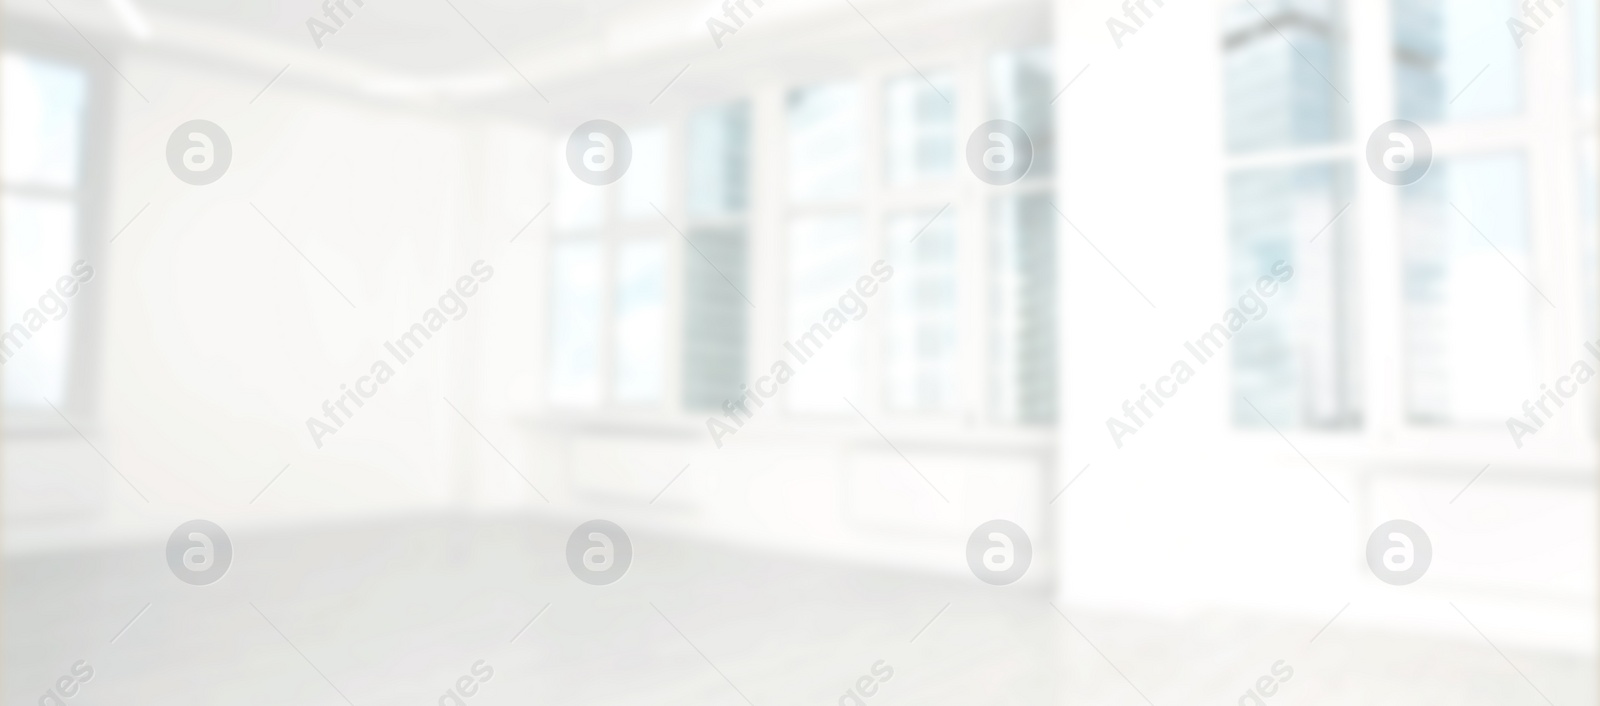 Image of Modern office room with white walls and windows, blurred view. Banner design